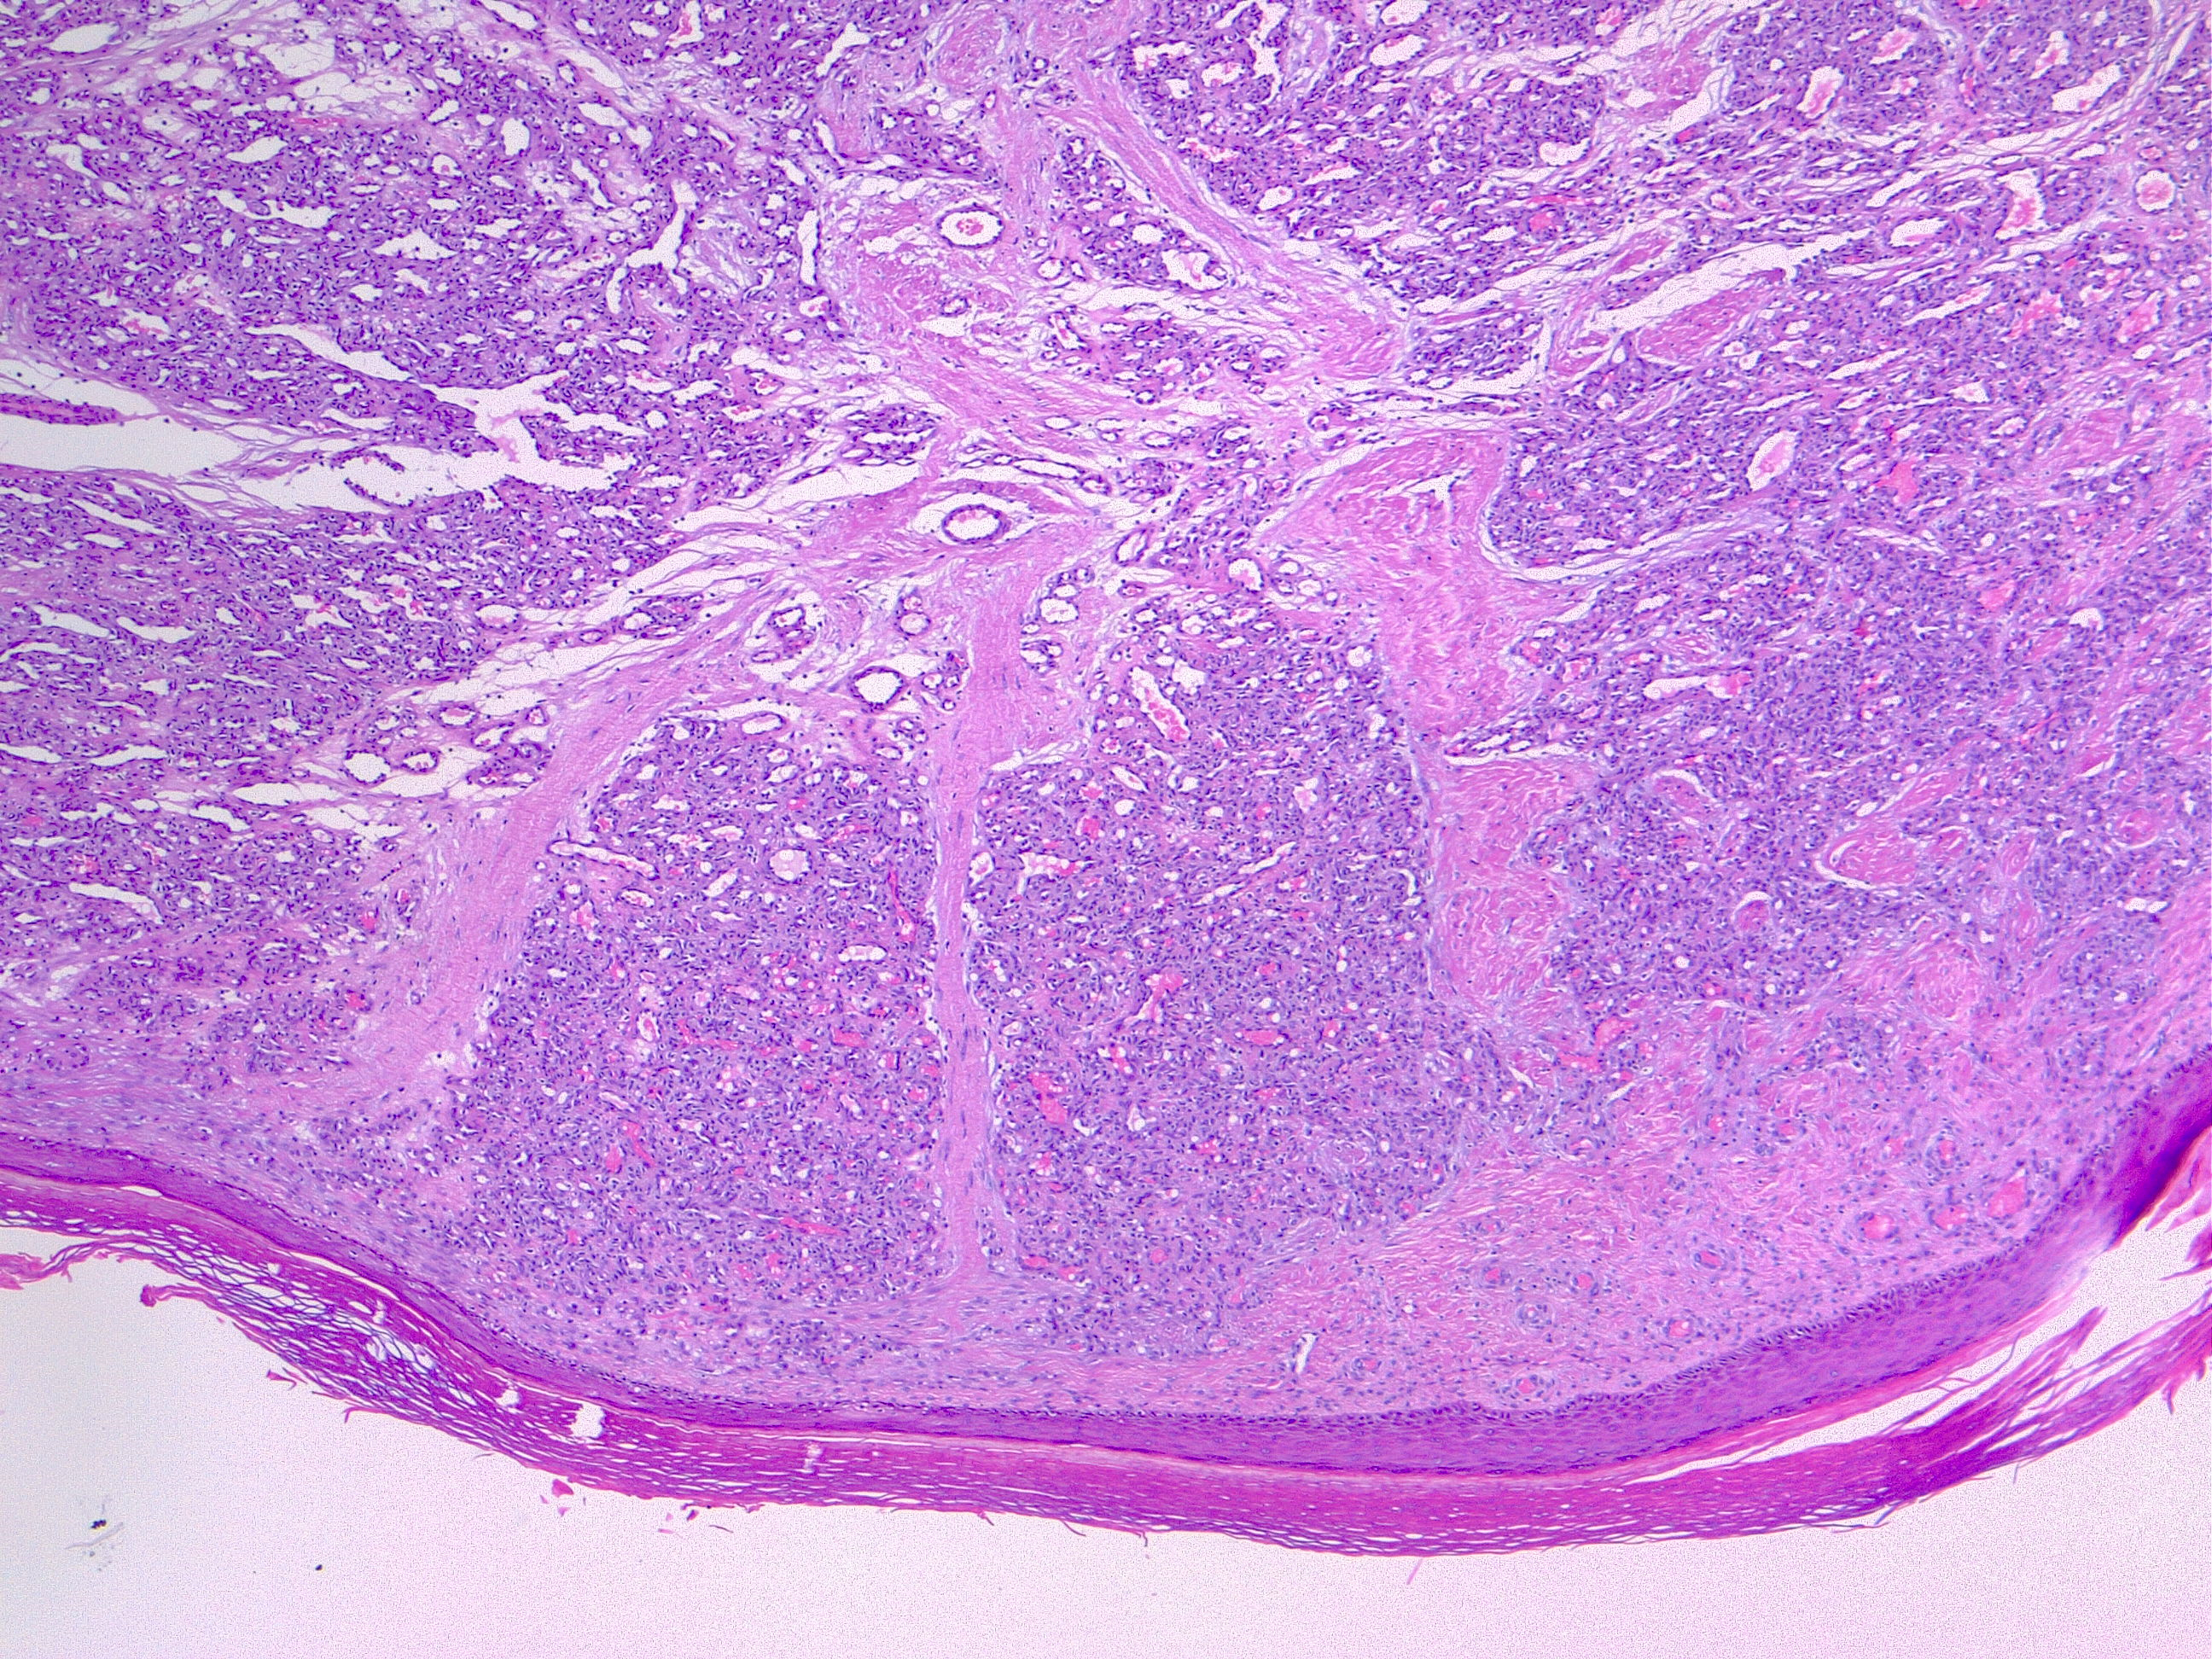 <p>Pyogenic Granuloma, H/E 4&times;. The lobular arrangement of the capillary vessels is a common feature.</p>
<p>&nbsp;</p>